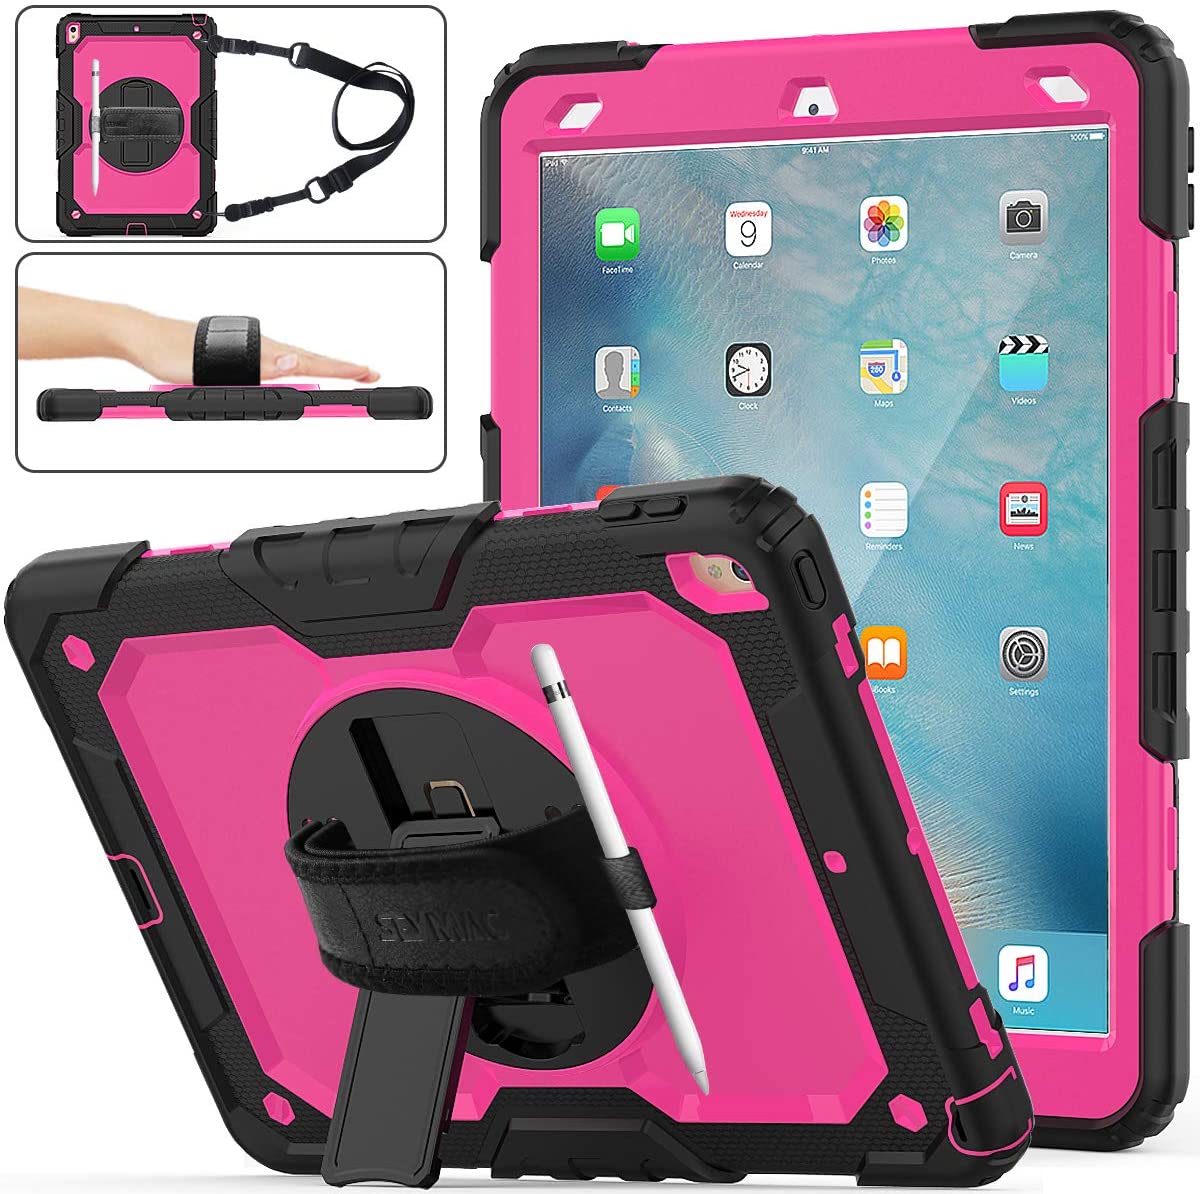 iPad Air 3rd Gen 2019/iPad Pro 10.5" 2017 Case, [Full-Body] & [Shock Proof] Armor Protective Case with 360 Rotating Stand & Strap - BRIGHTBLUE. - e4cents